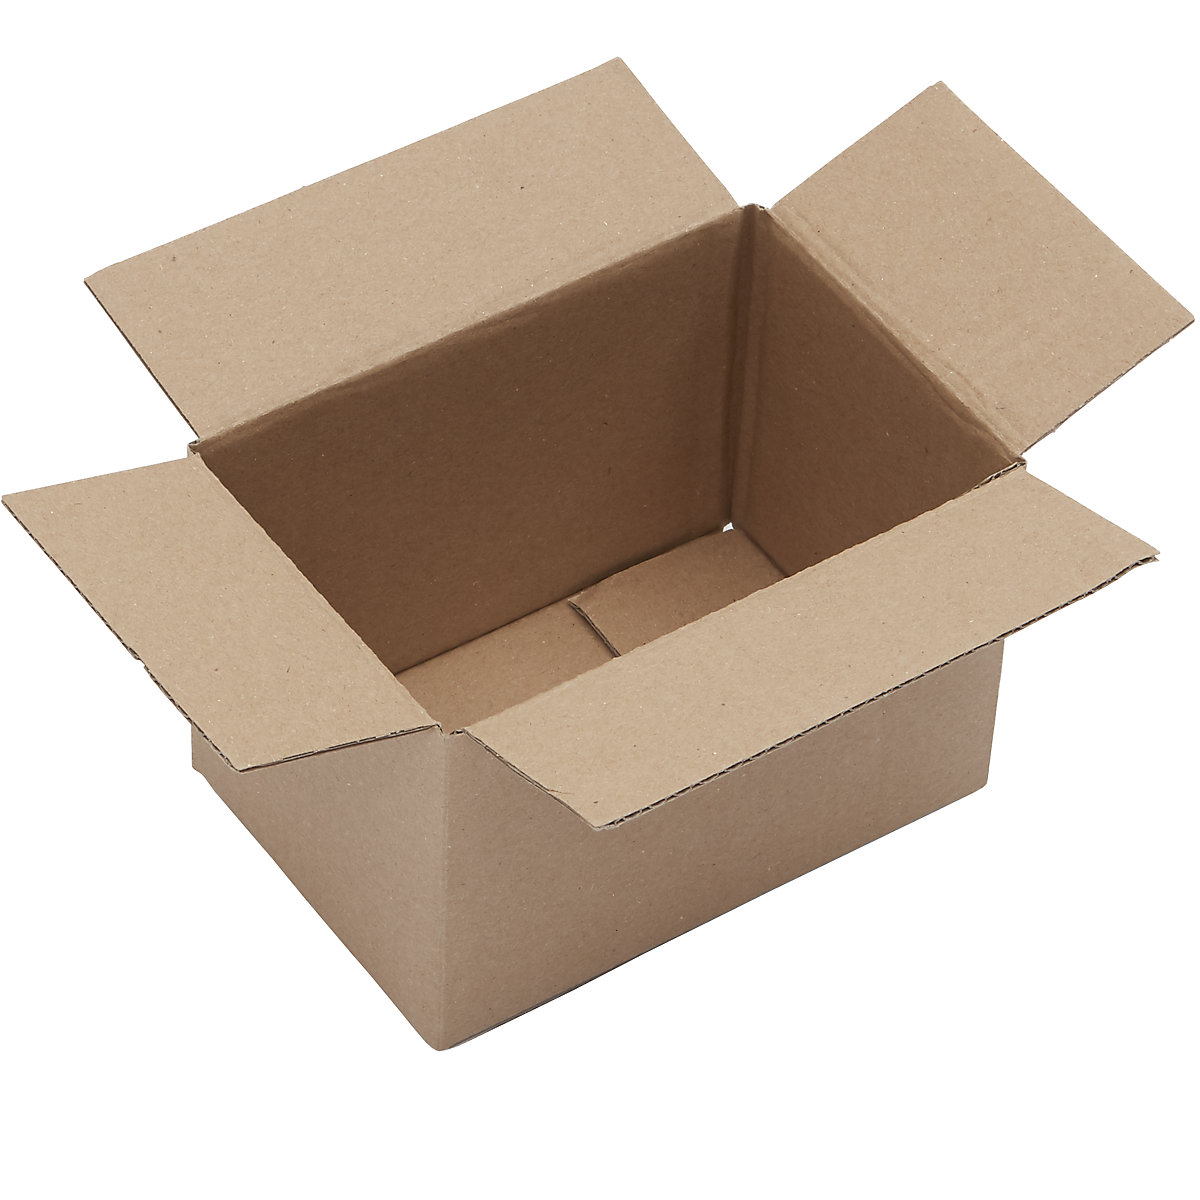 50 8x5x5 Cardboard Paper Boxes Mailing Packing Shipping Box Corrugated Carton